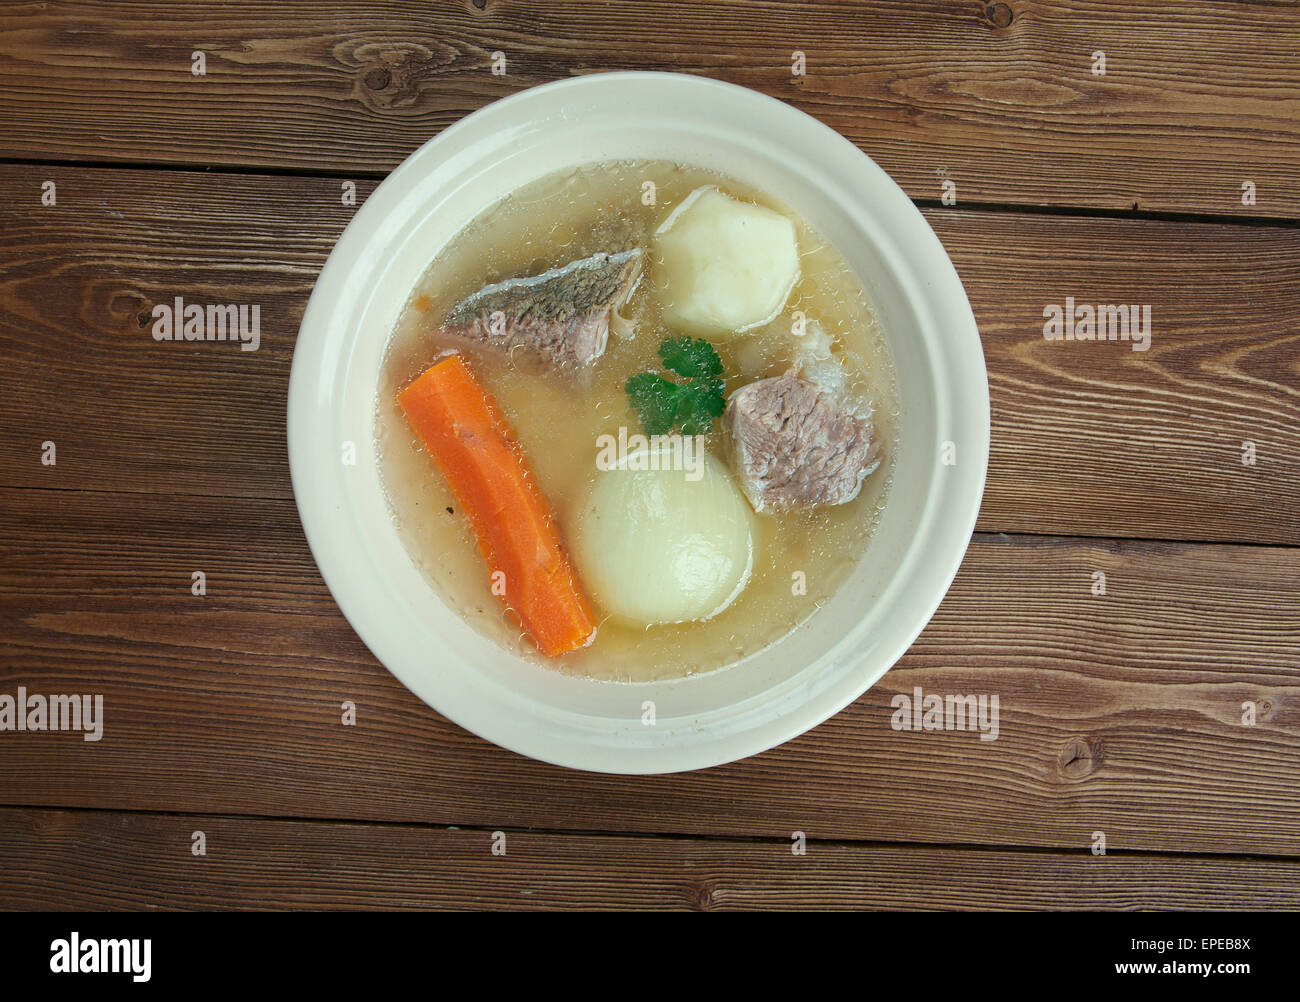 Aberaeron Broth - Welsh-language. broth which consists of bacon, beef, parsnips, cabbage, leeks, carrots Stock Photo